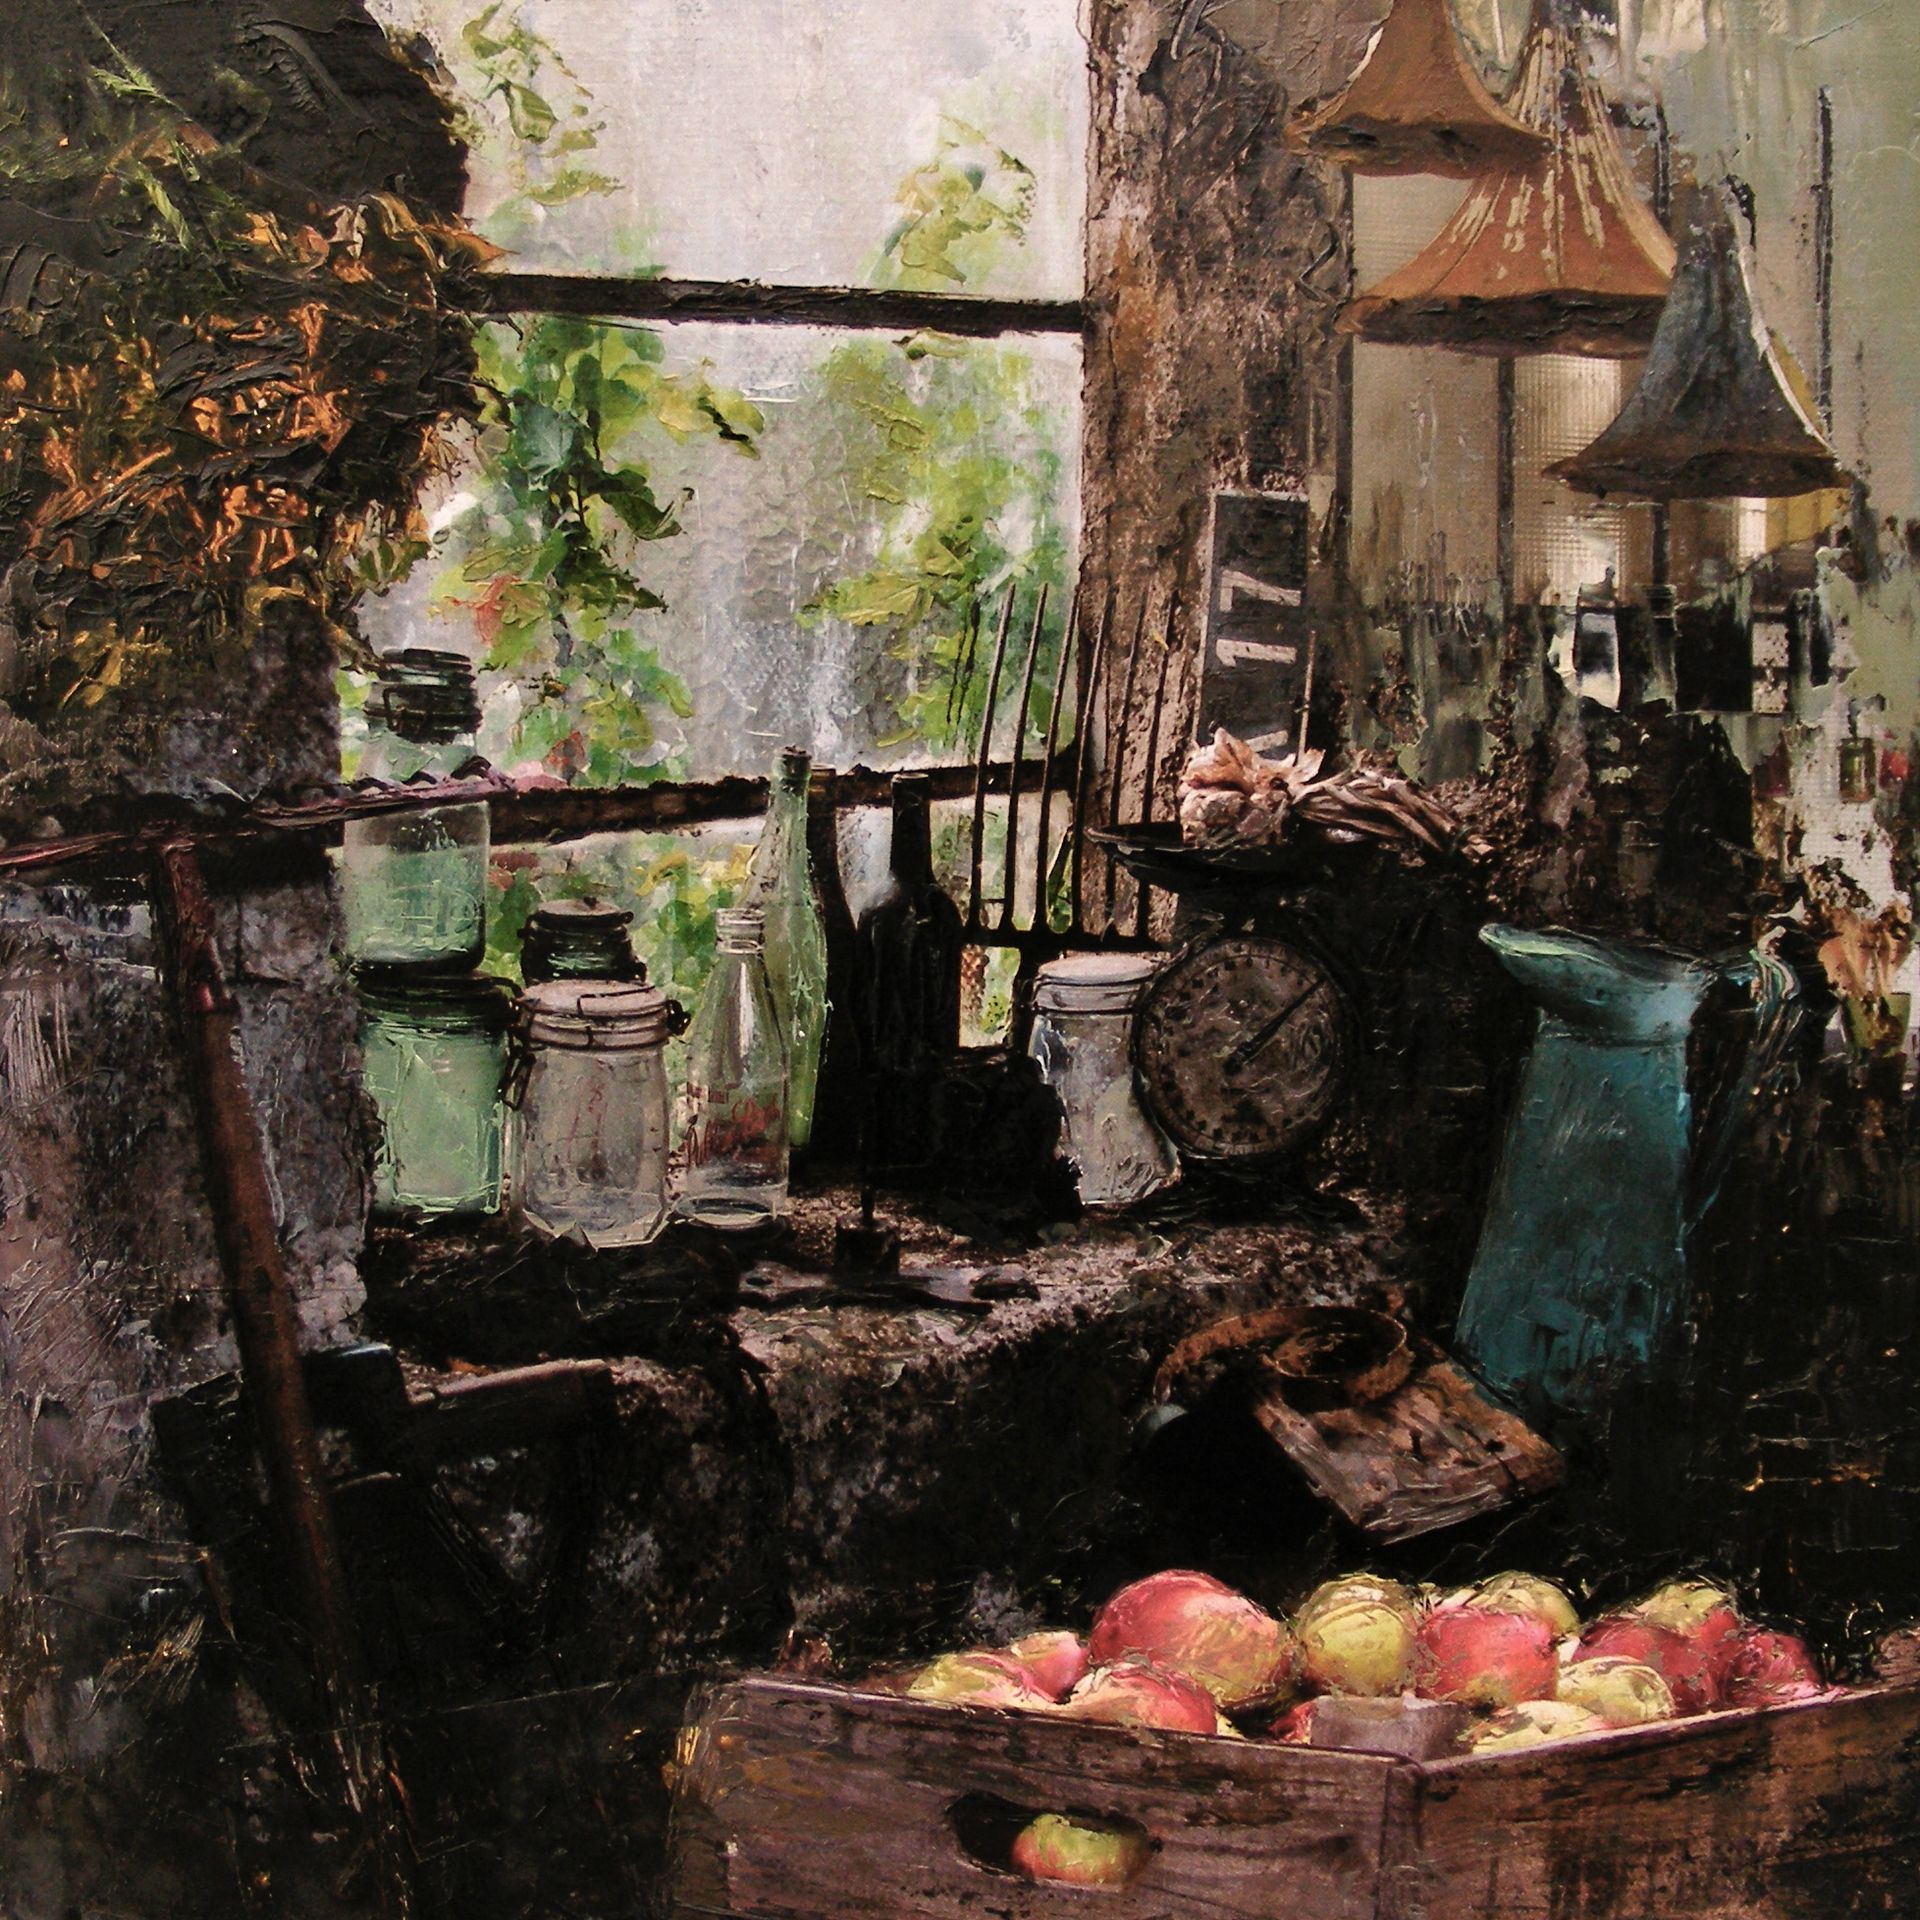 18. The garden shed 30x30cm